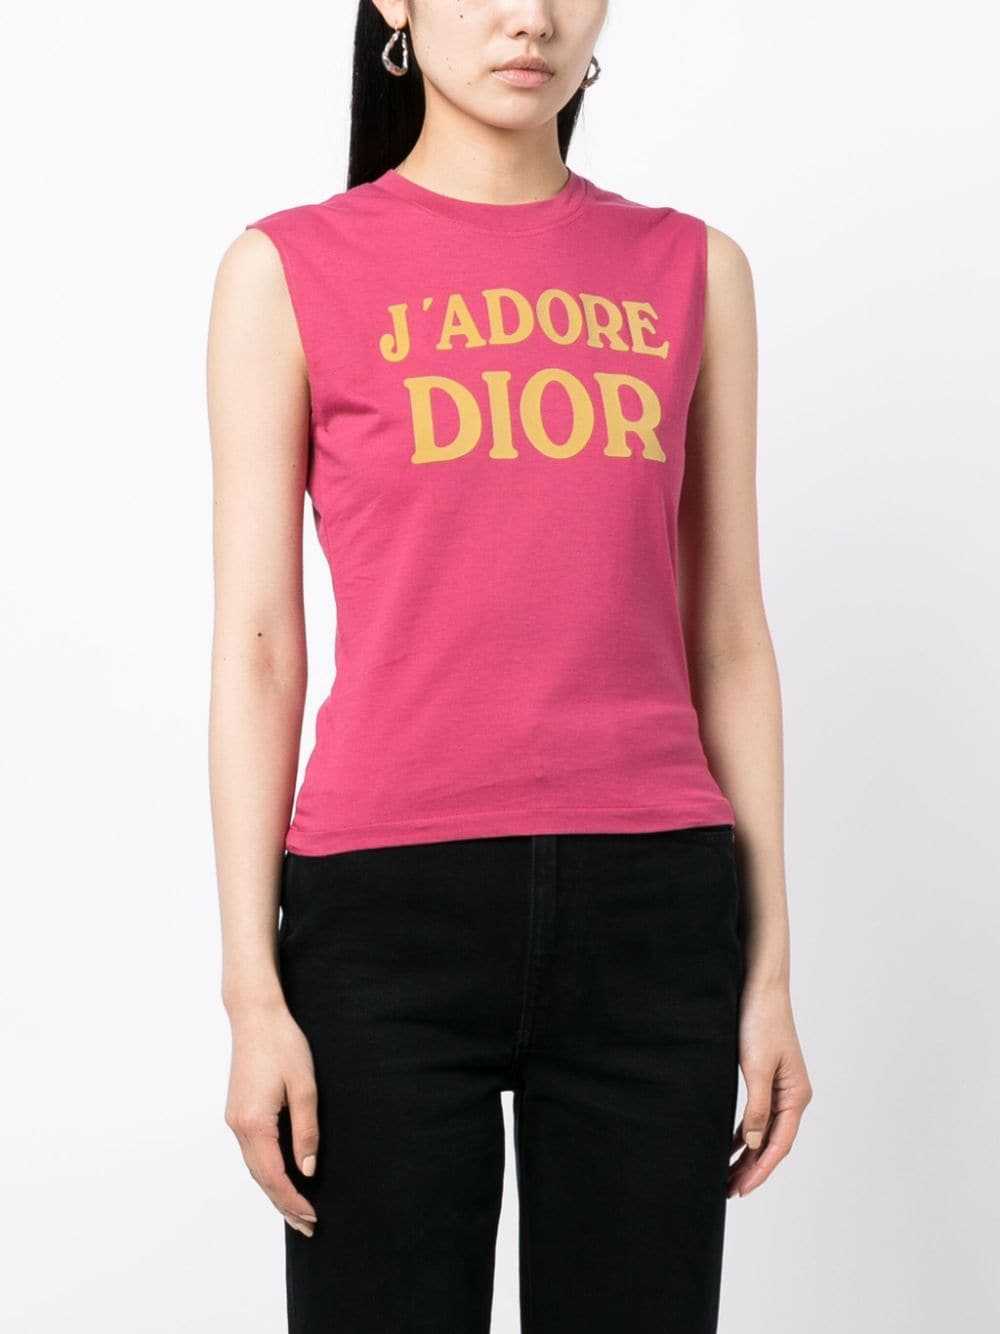 Christian Dior Pre-Owned 2002 J'Adore Dior tank t… - image 3